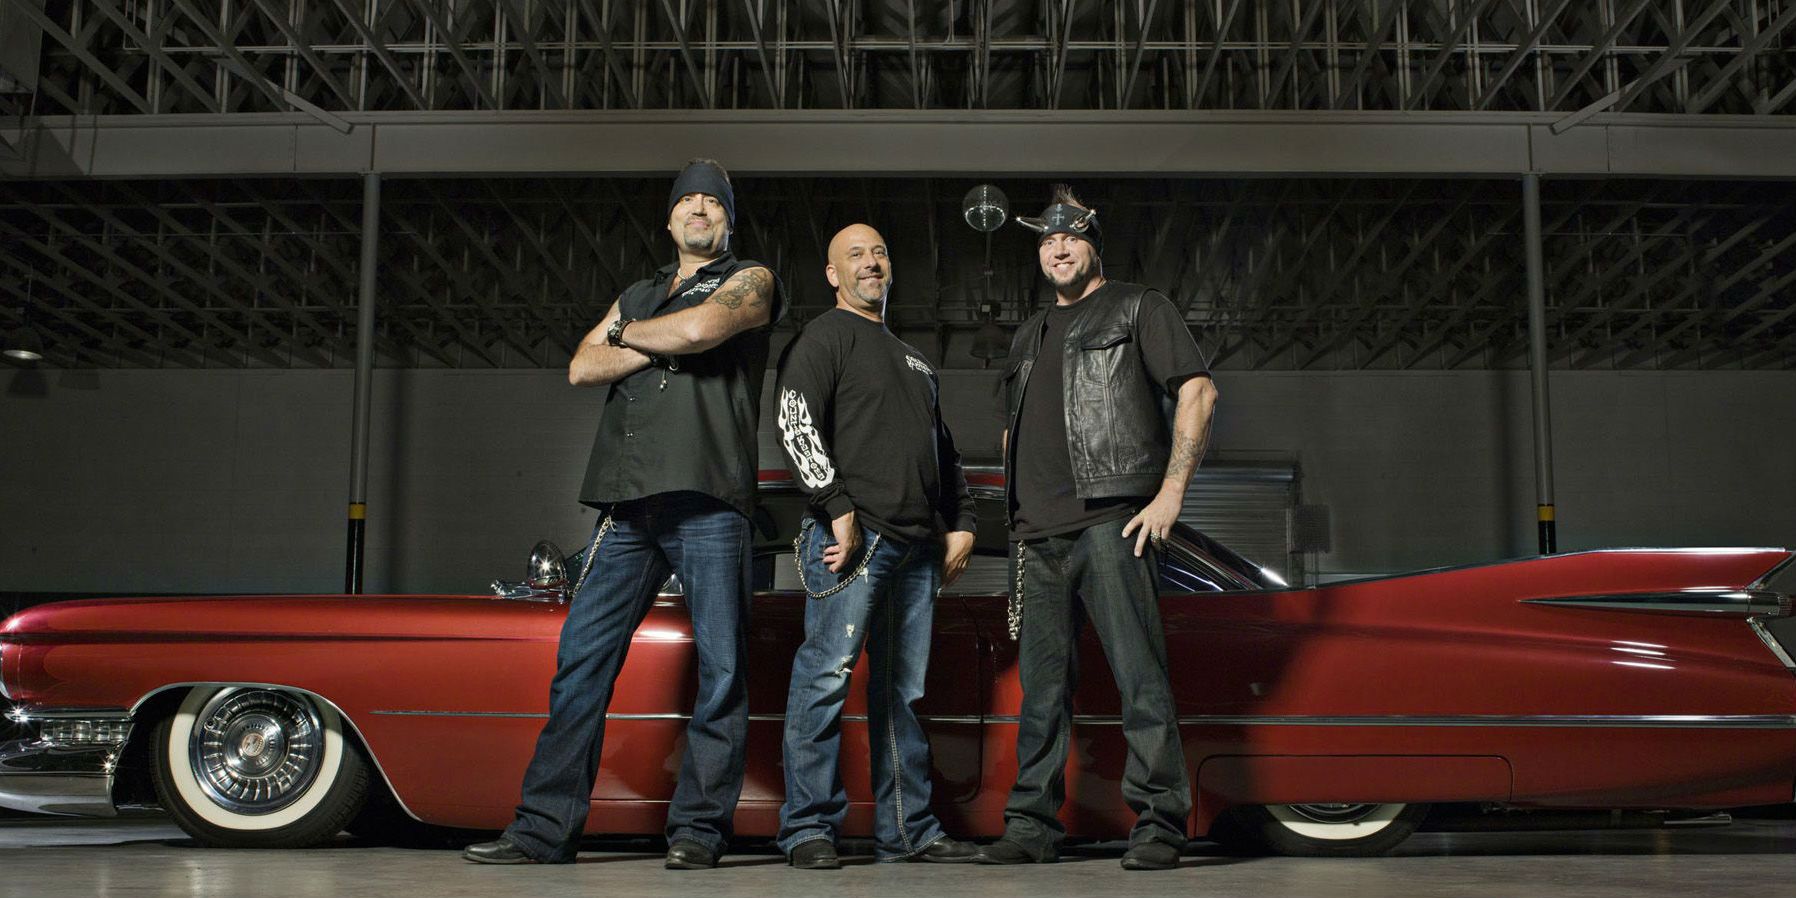 Counting Cars cast